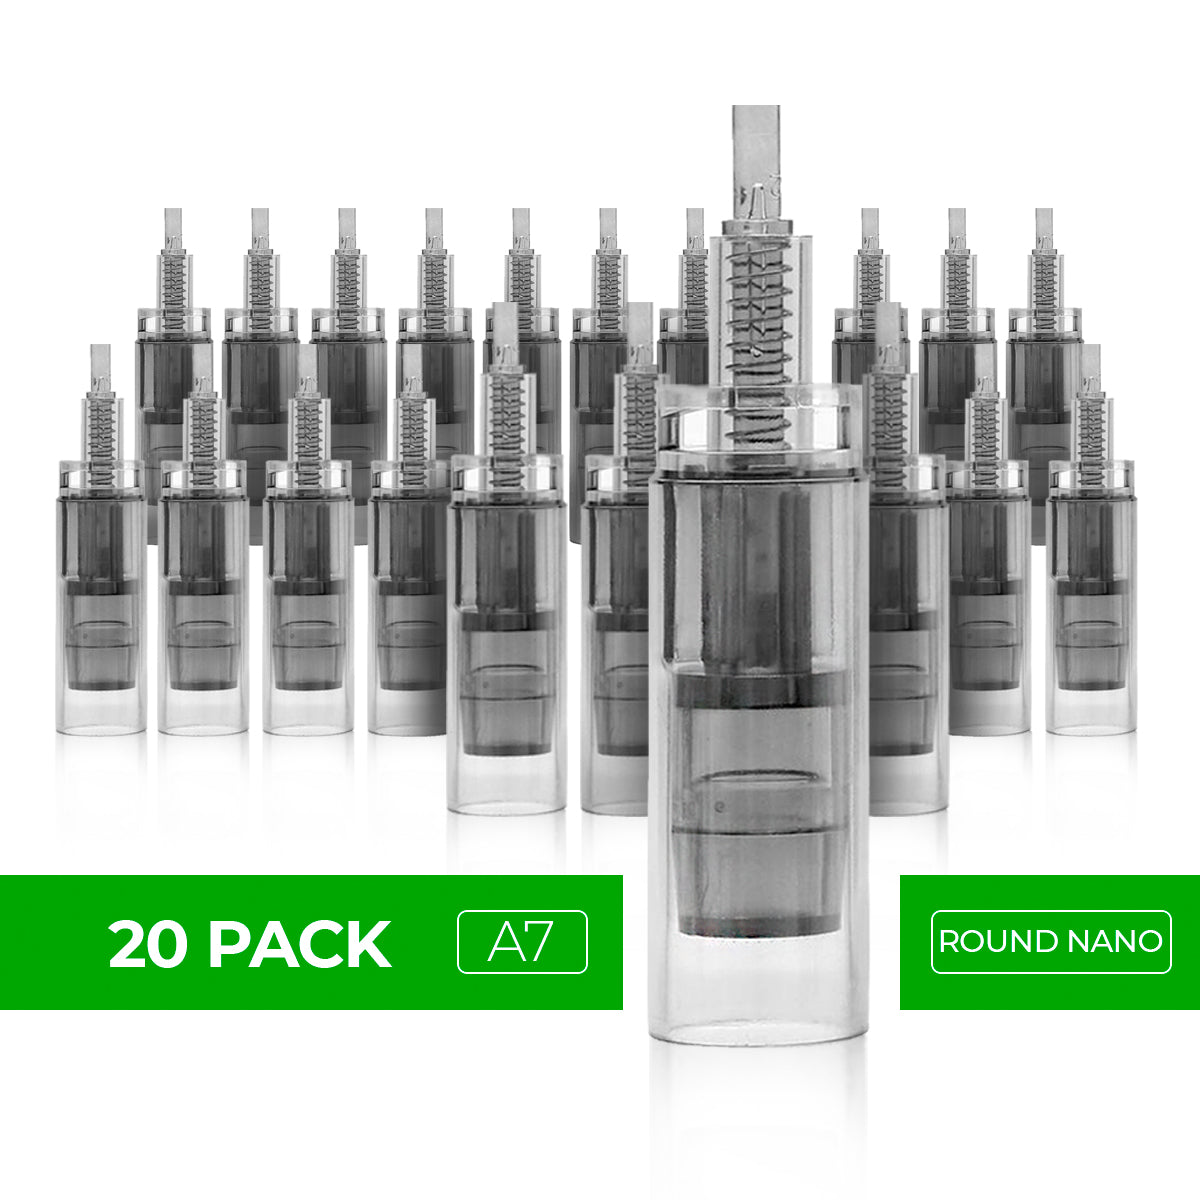 Dr. Pen Ultima A7 Replacement Cartridges - (20 PACK) - Round Nano Bayonet Slot - Disposable Replacement Parts